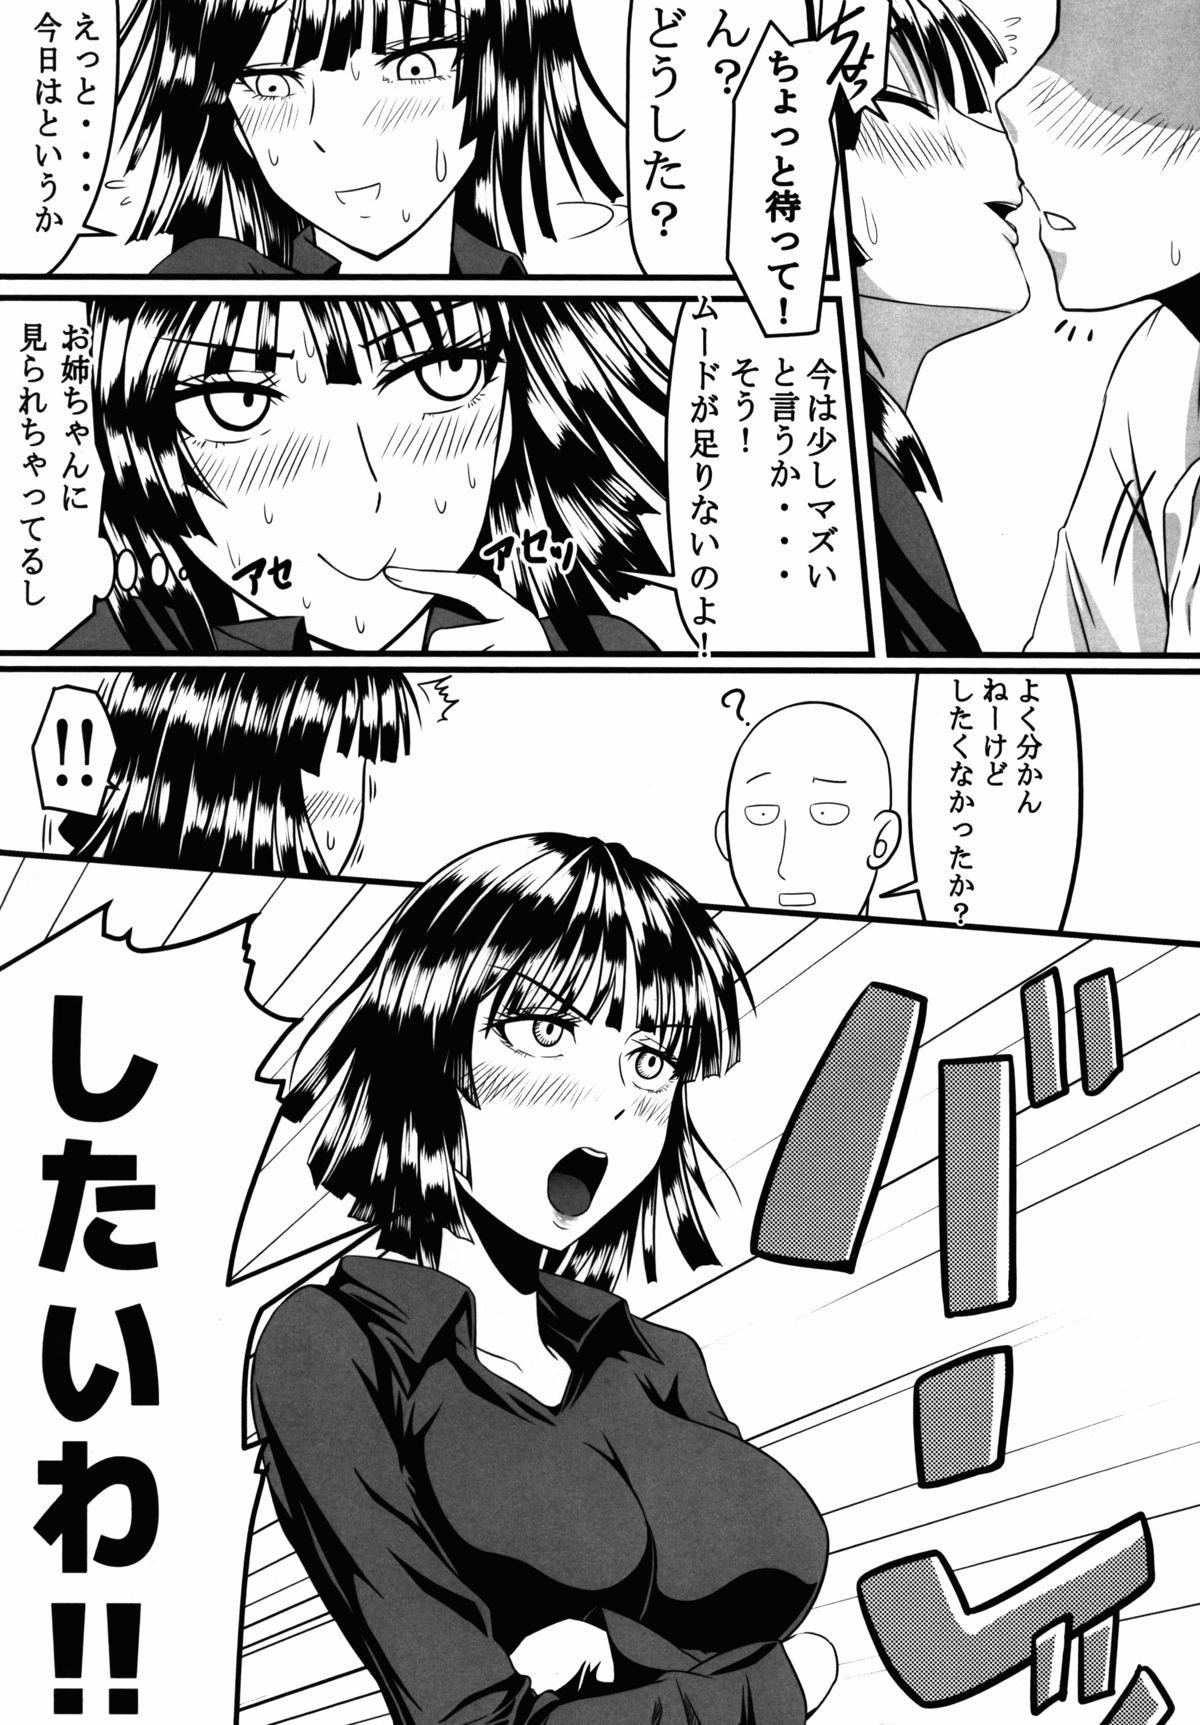 Clothed Sex Dekoboko Love sister - One punch man Amature Sex - Page 8